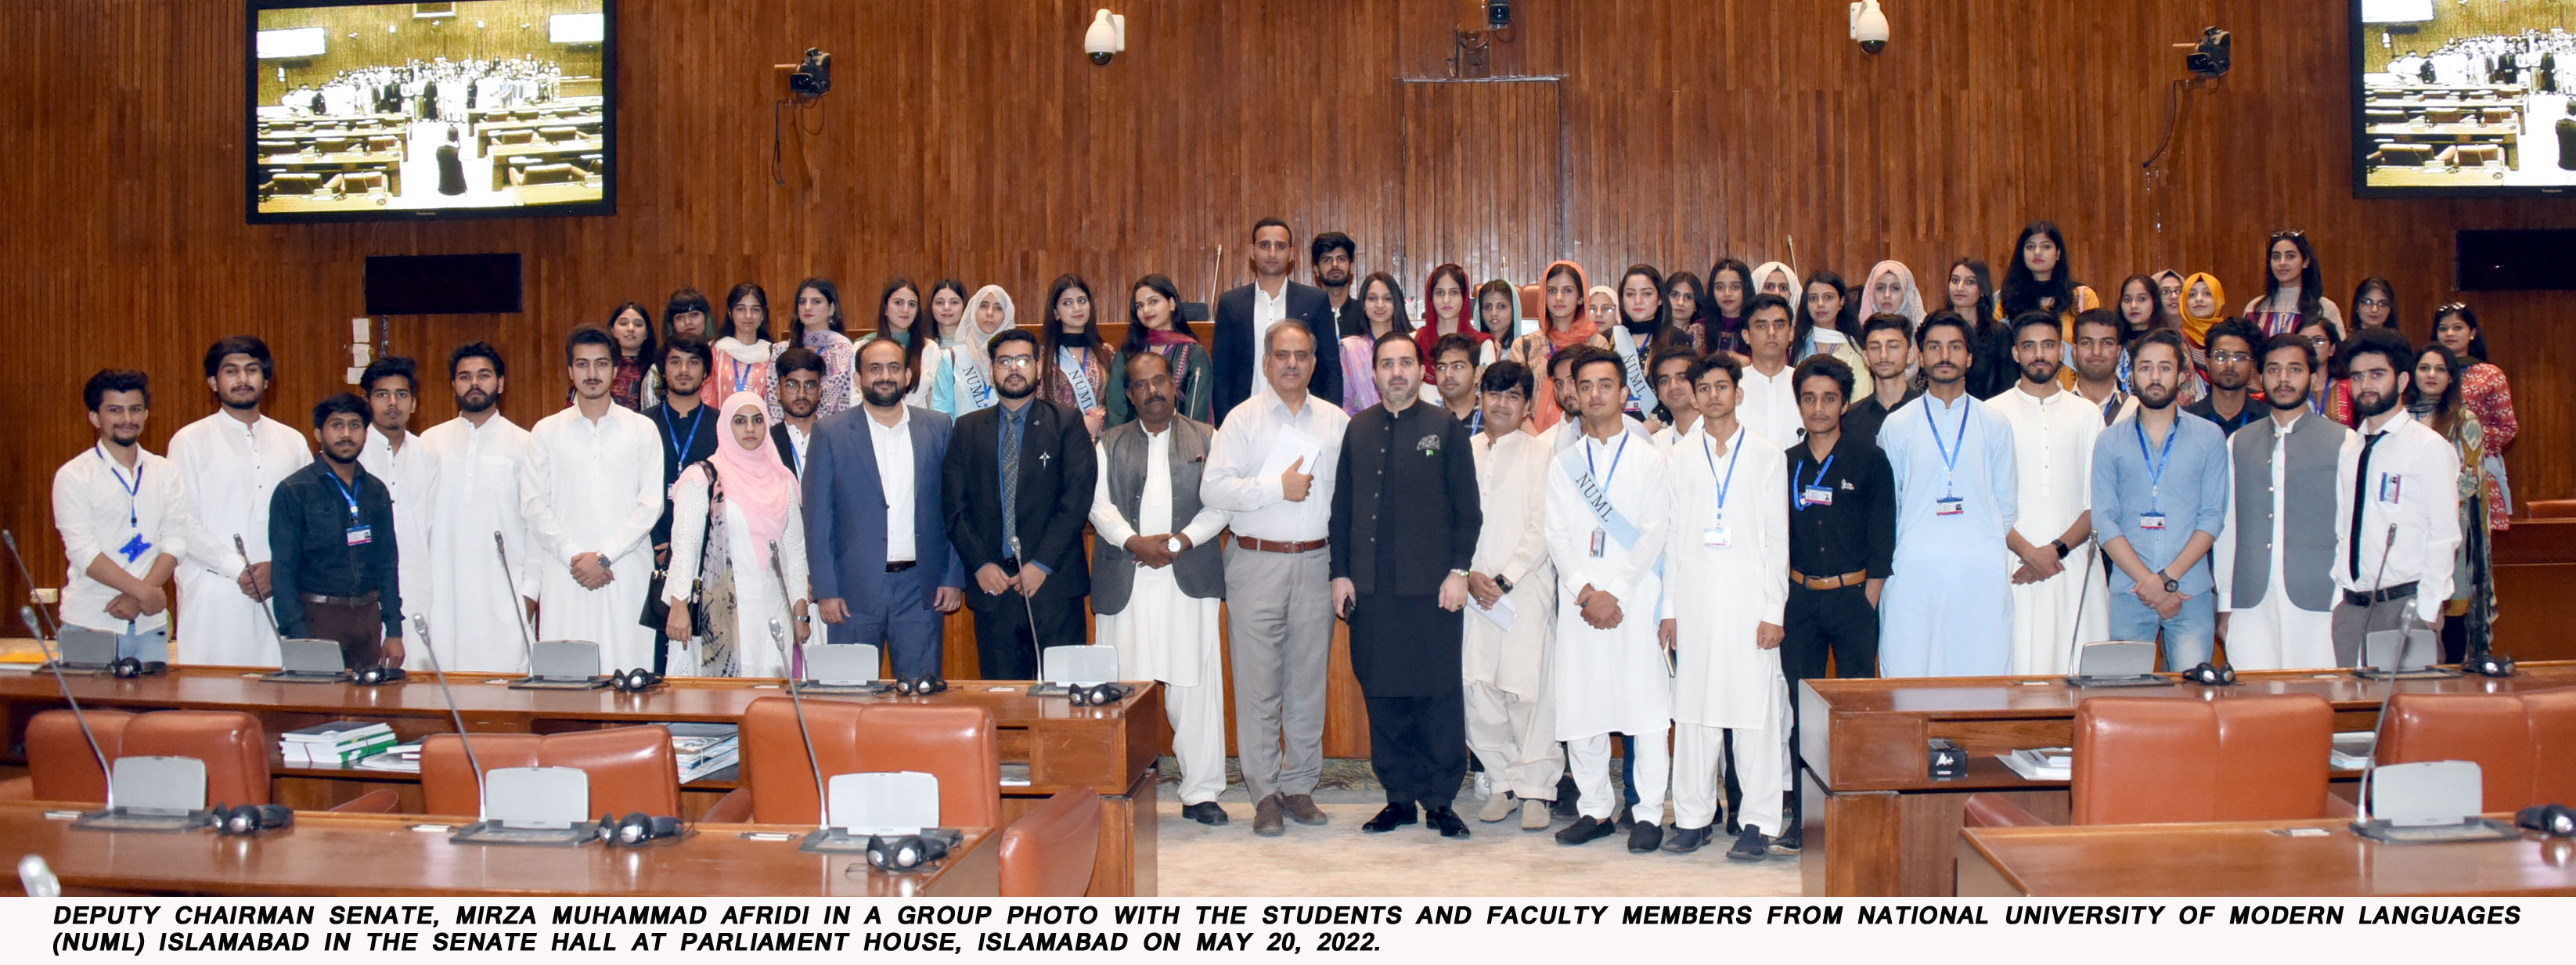 Deputy Chairman Senate, Mirza Muhammad Afridi in a group photo with students and faculty members of National University of Modern Languages (NUML) Islamabad in Senate Hall, Parliament House on 20 May 2022.